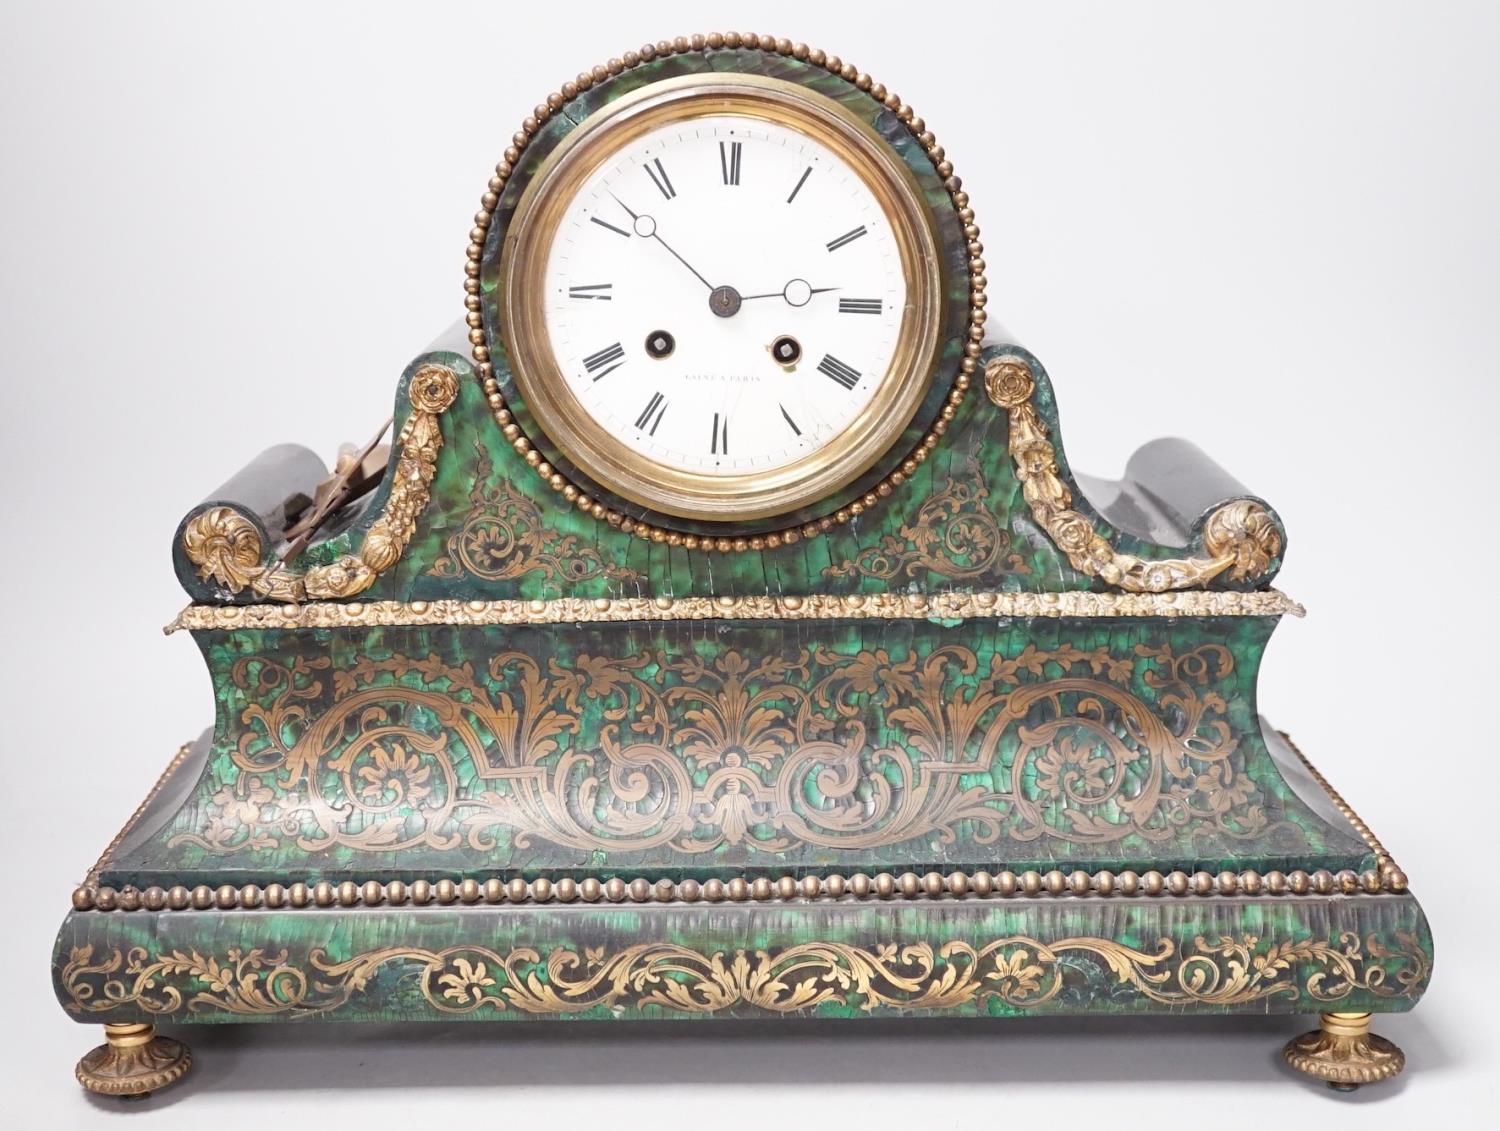 A 19th century French green Boulle work mantel clock. 41cm wide